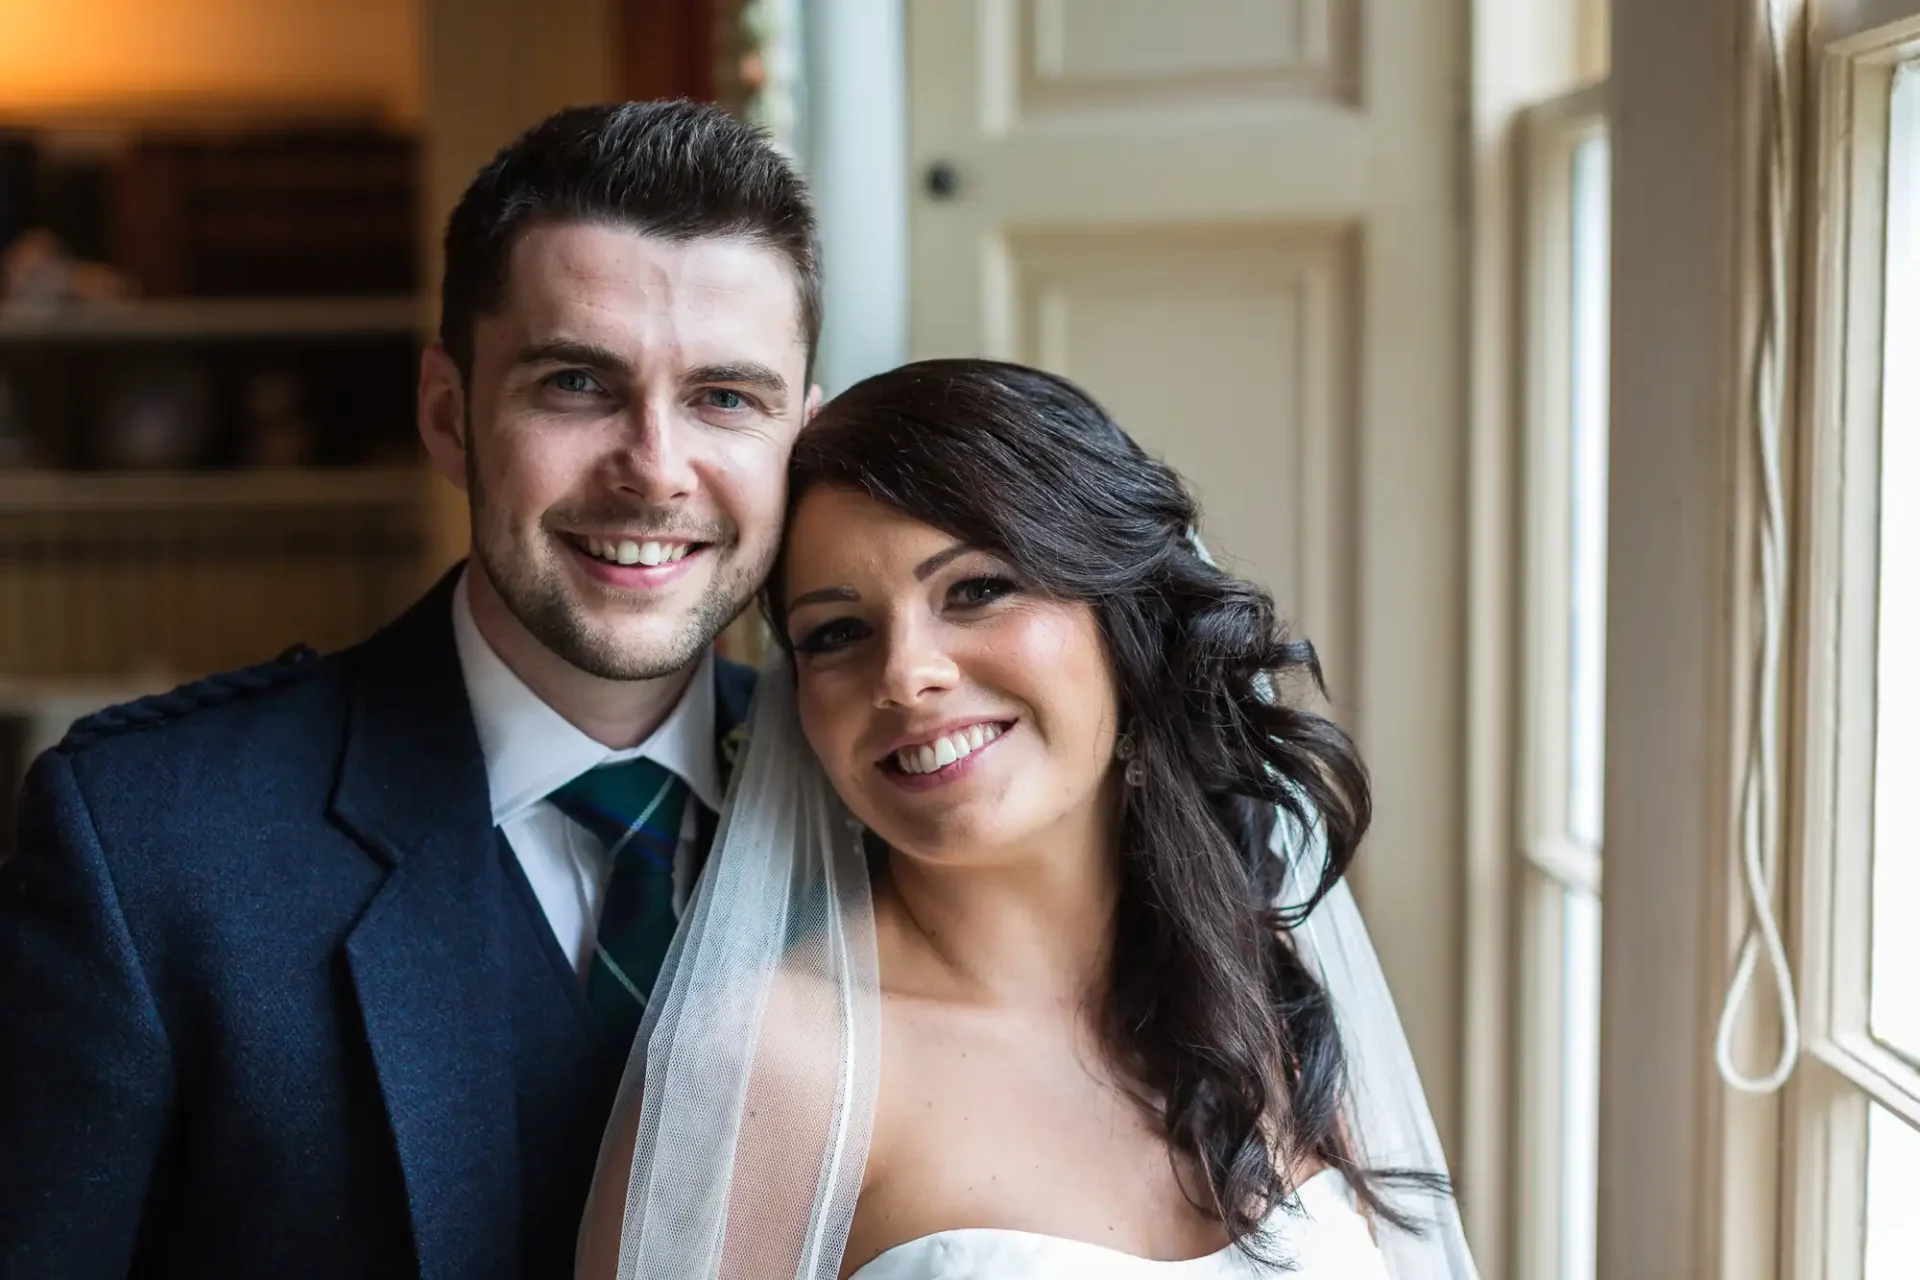 A bride and groom smiling near a window, the bride in a white dress and veil, the groom in a dark suit and tie.